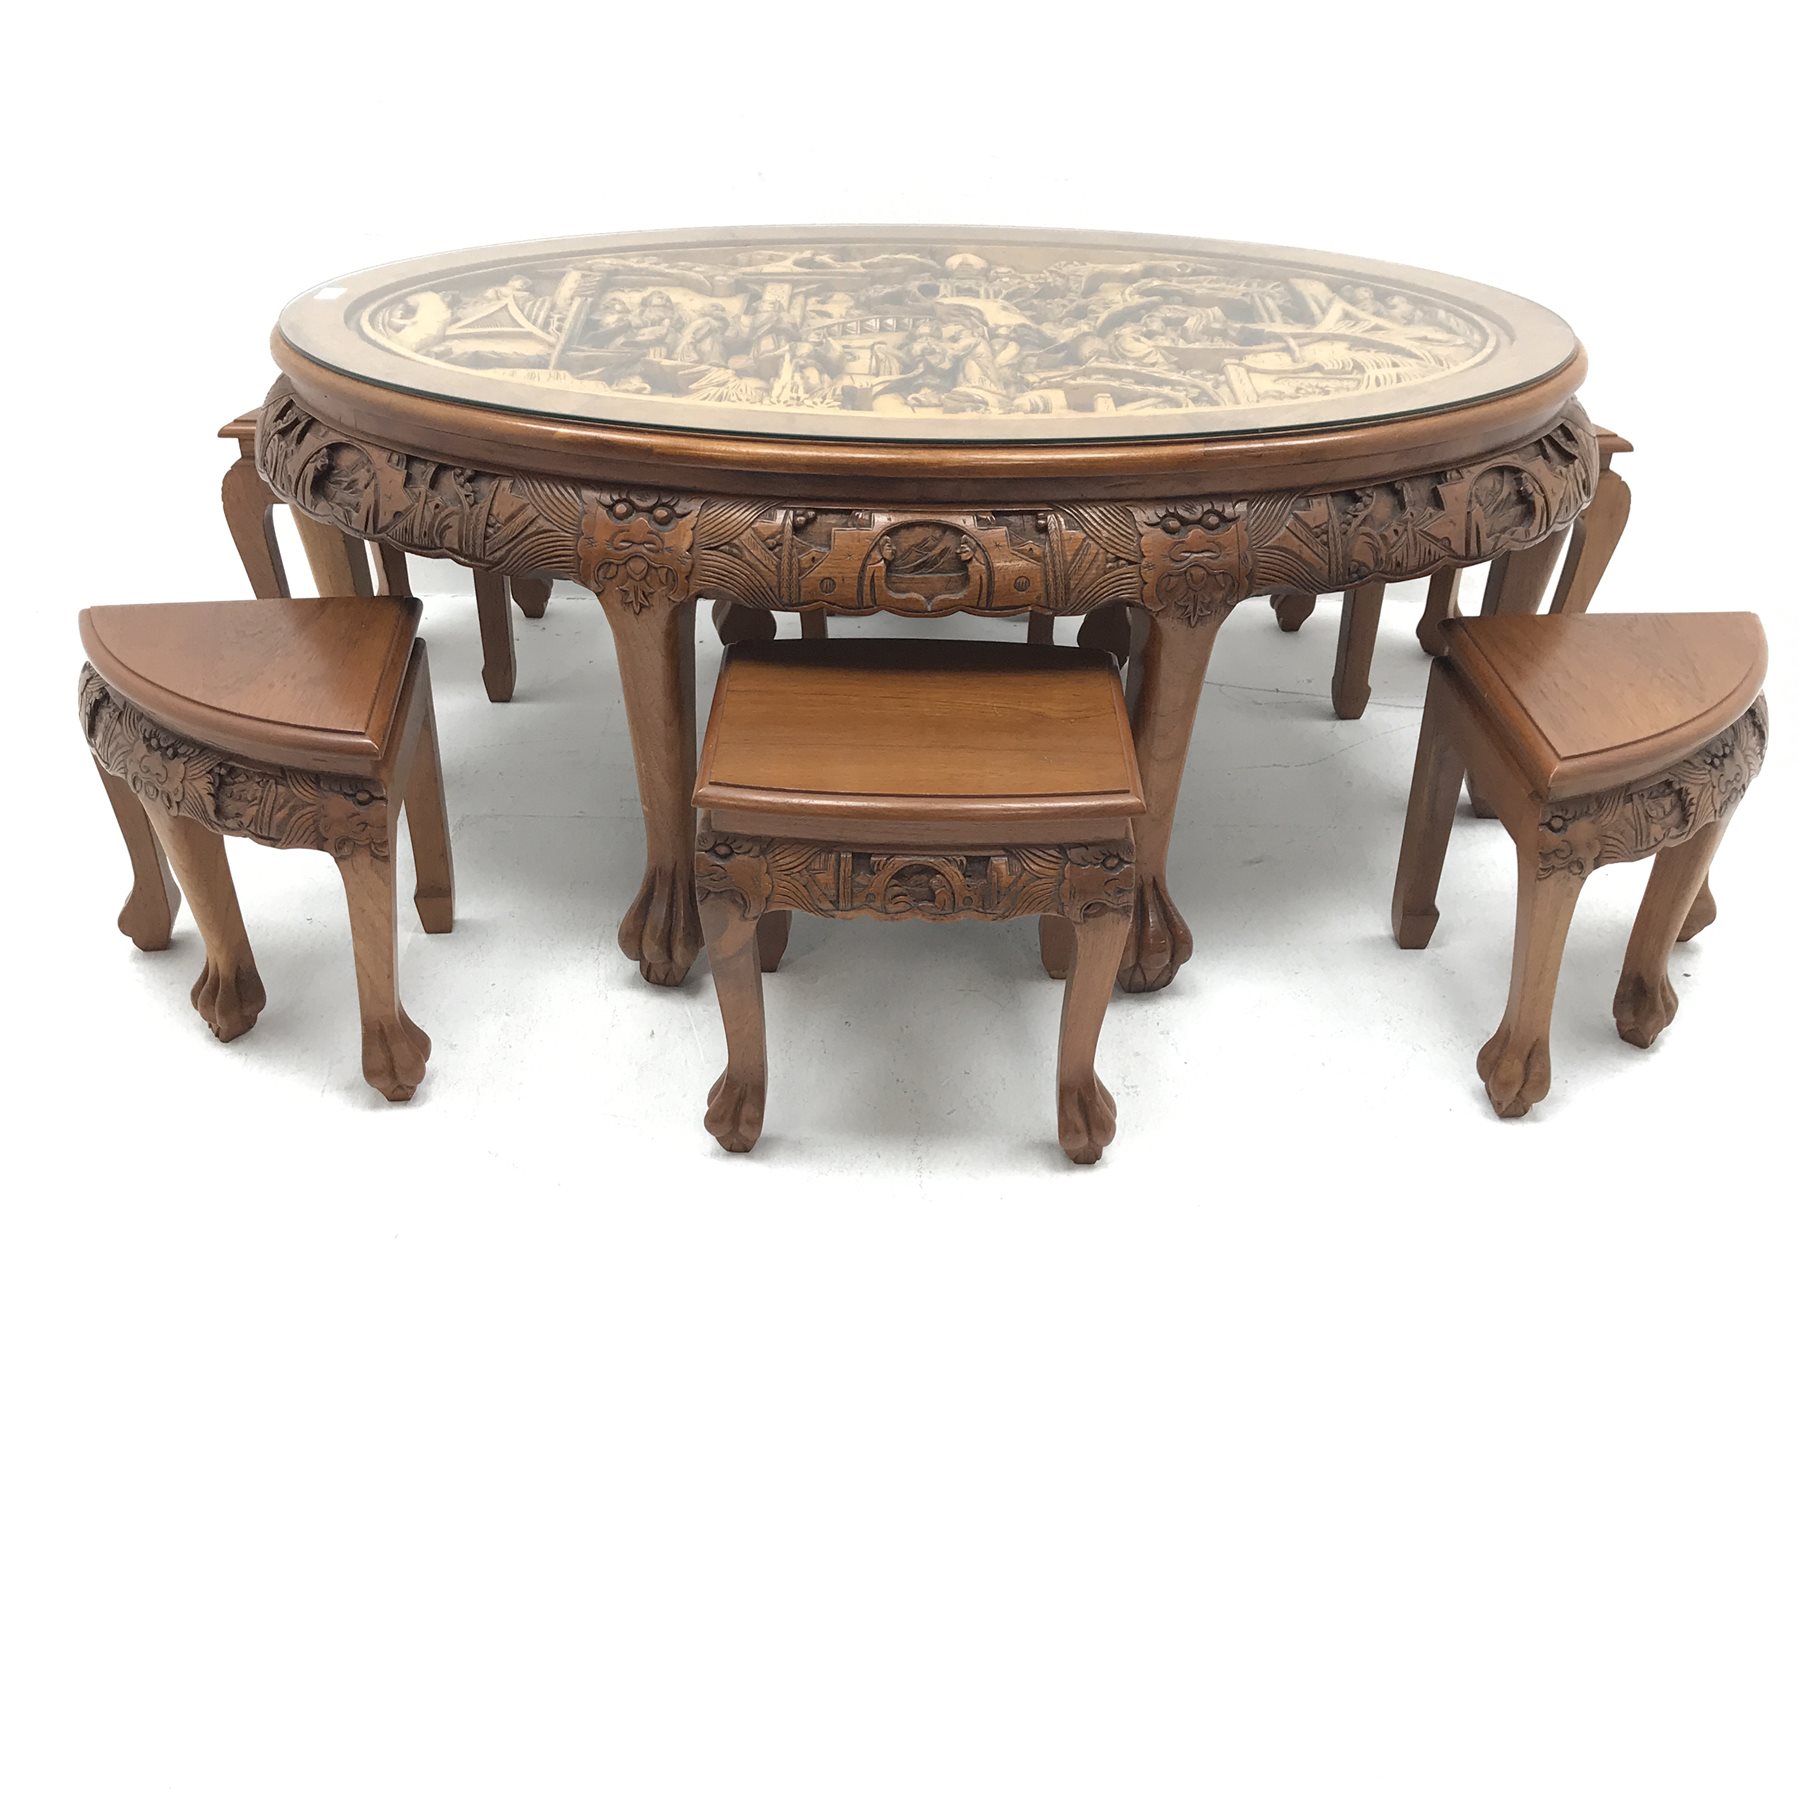 Eastern glass topped oval table decorated in high relief with six integral stools, W124cm, H50cm, D8 - Image 3 of 5